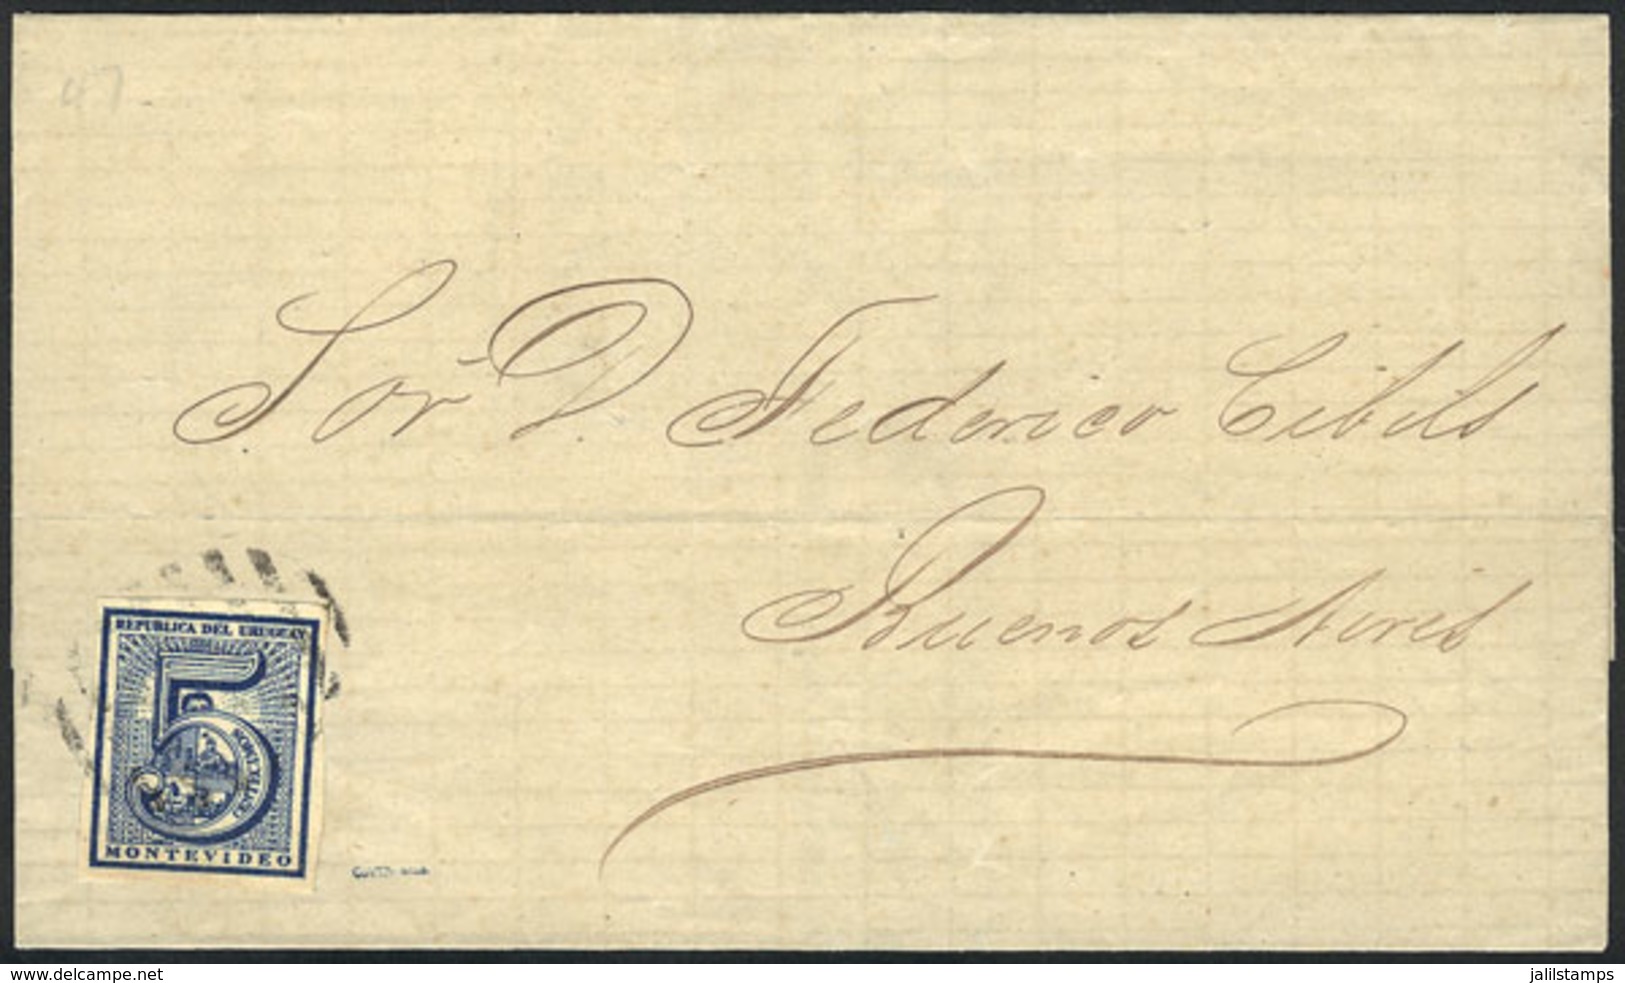 URUGUAY: Folded Cover Franked By Sc.30 (type 47), Sent From Montevideo To Buenos Aires On 3/AU/1868, Excellent Quality! - Uruguay